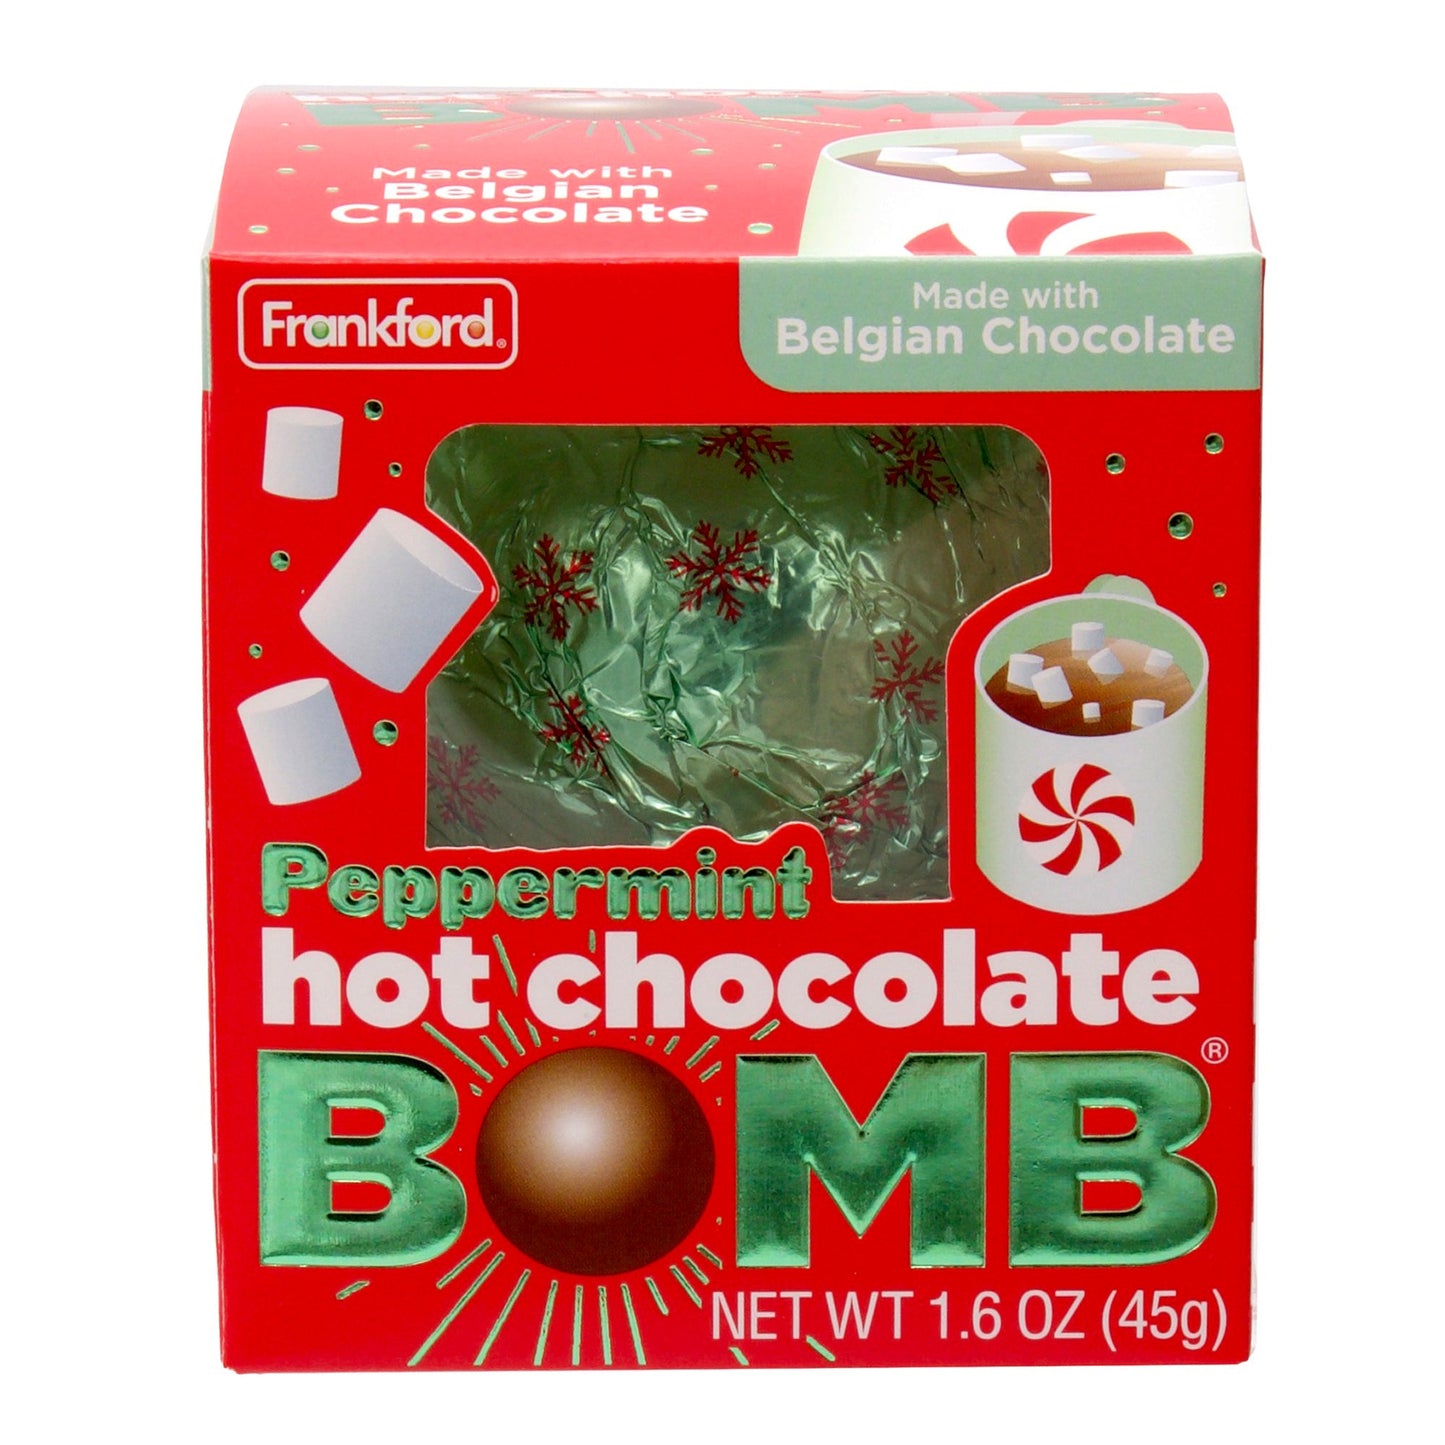 red box with green and snow flake print foil wrapped hot chocolate bomb